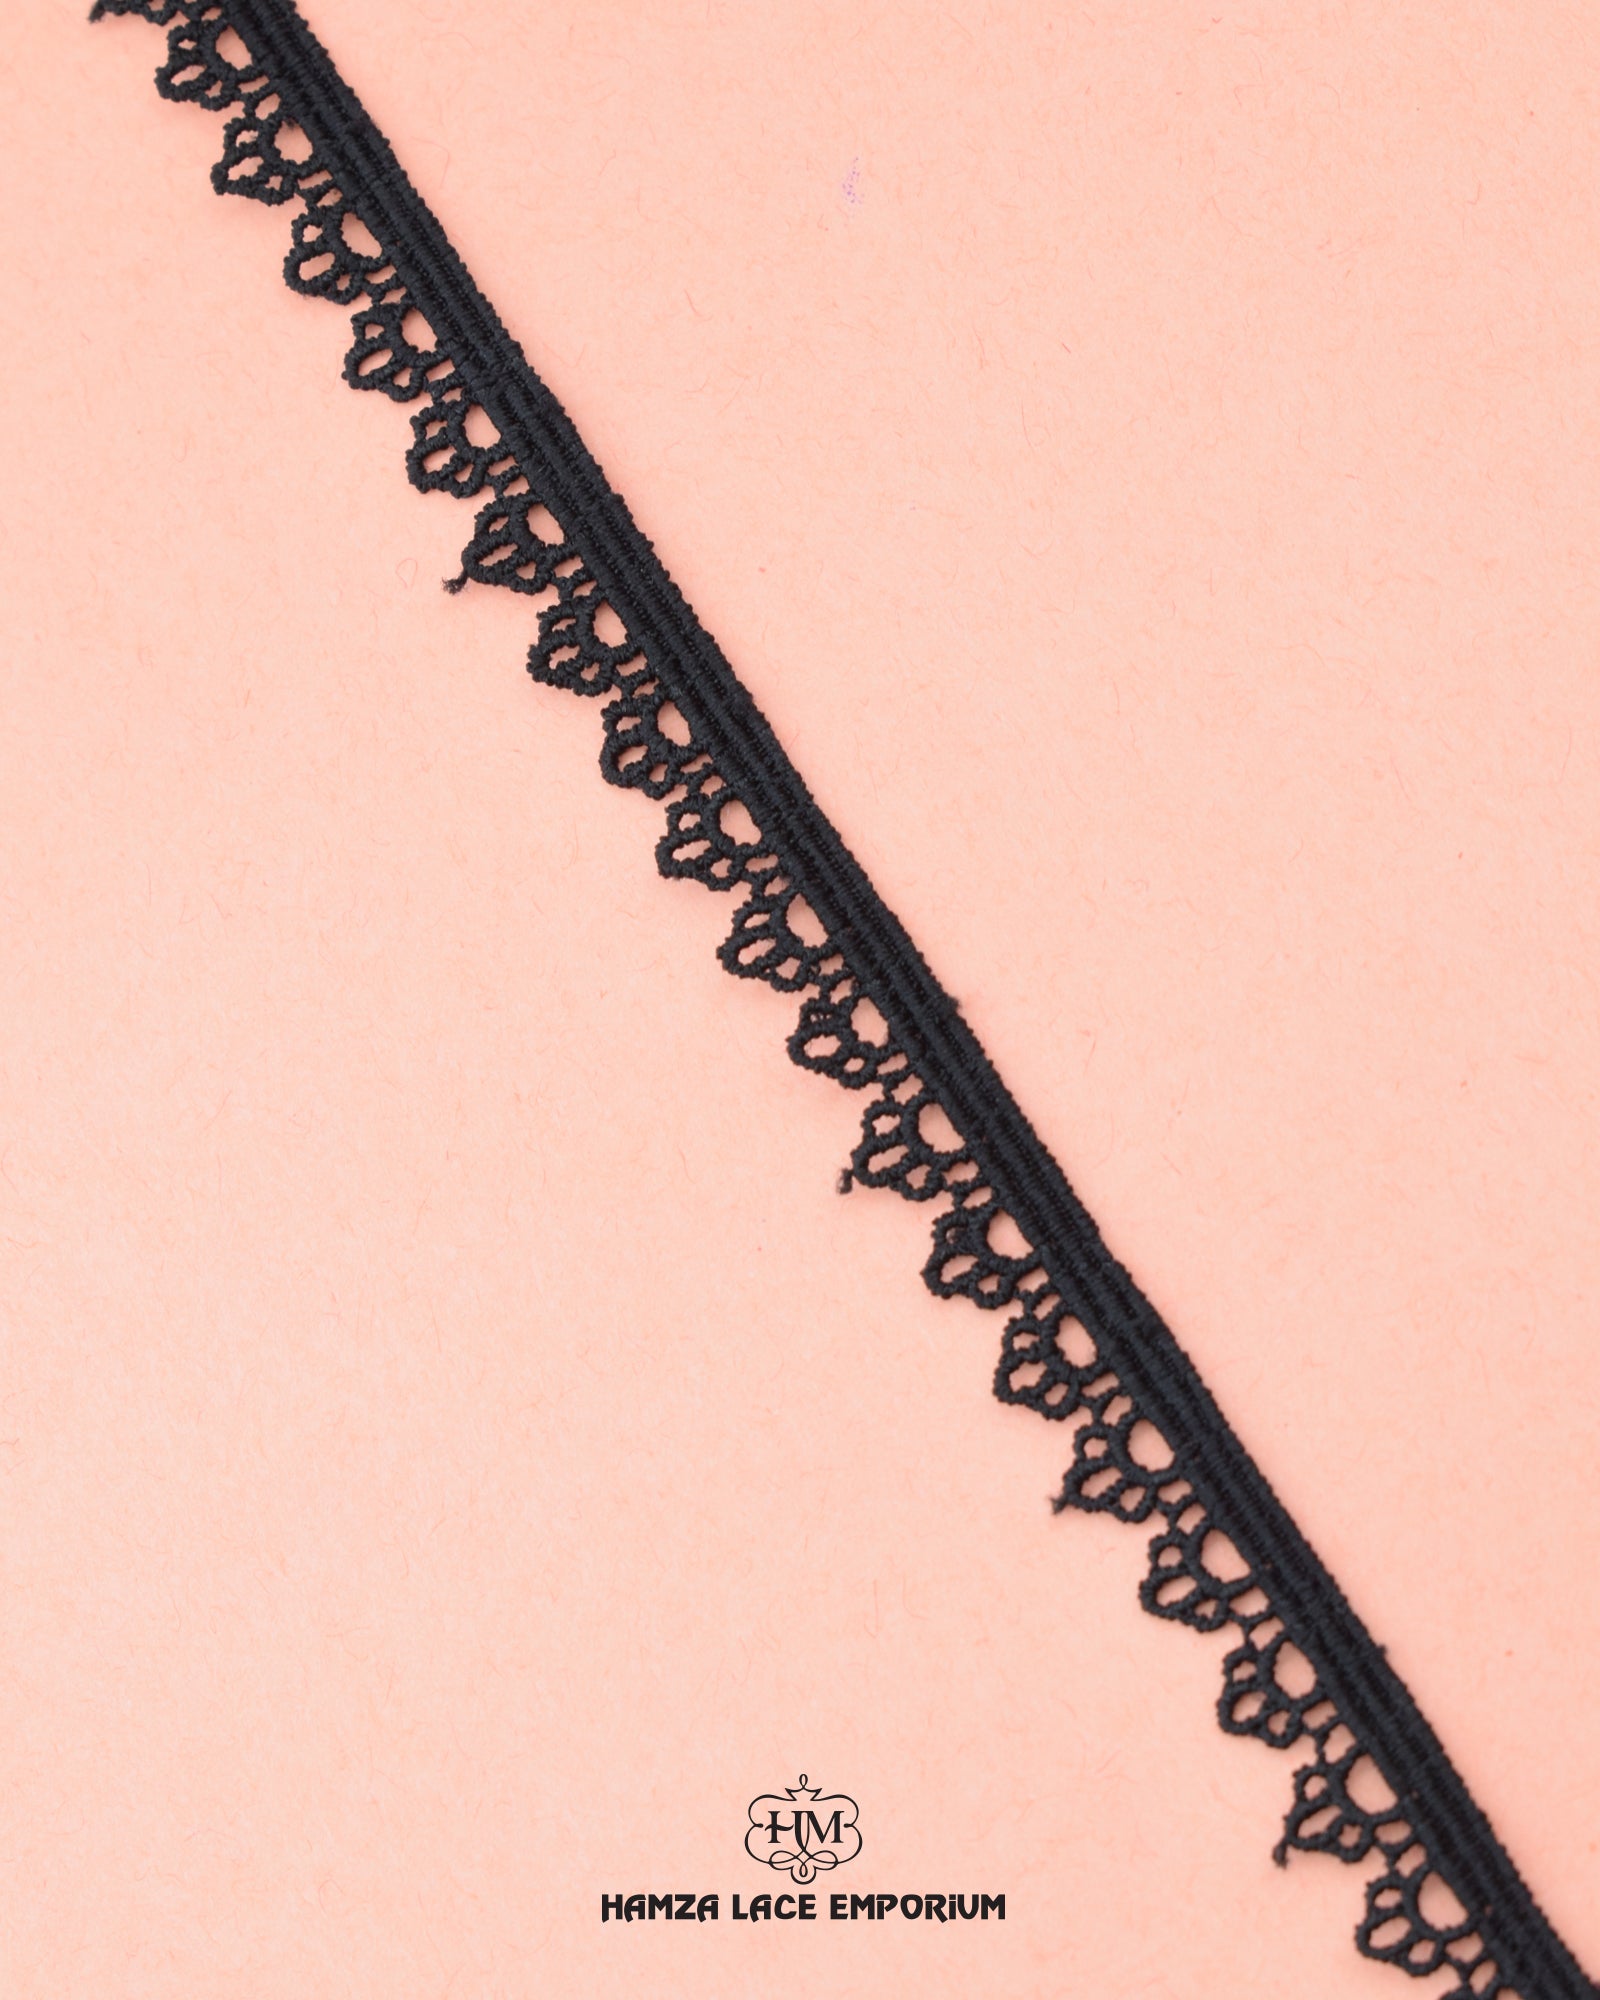 The black 'Edging Scallop Lace 2513' is shown closely